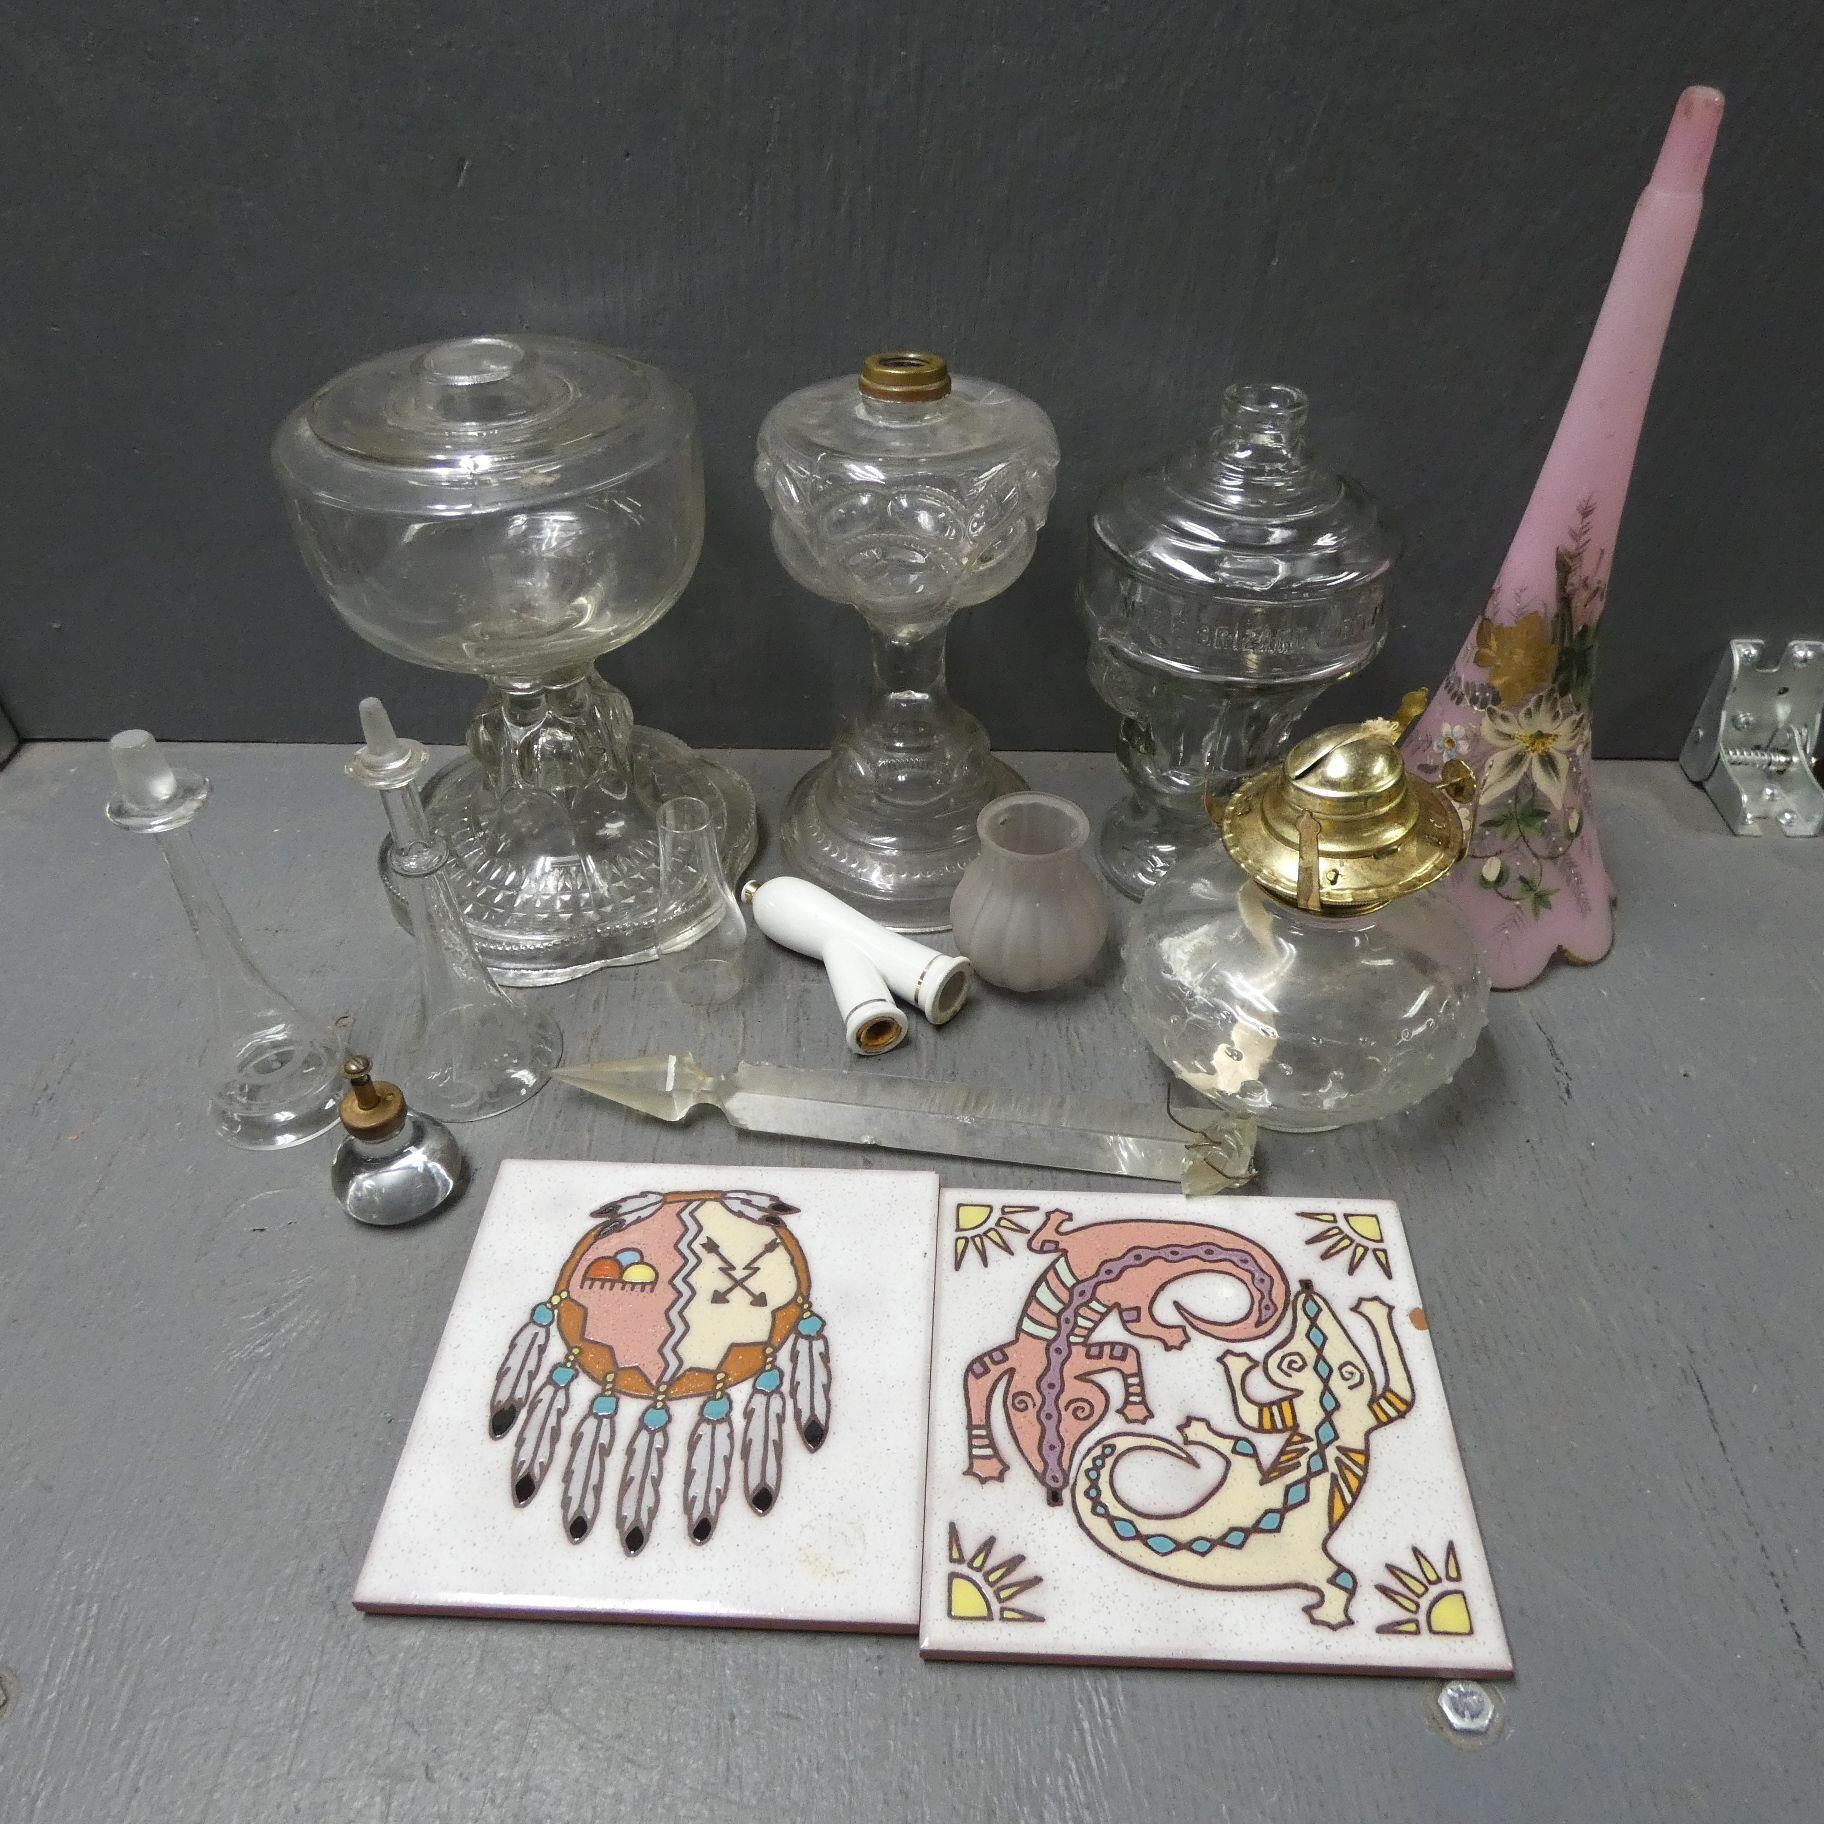 Oil Lamp Parts & Other Glassware